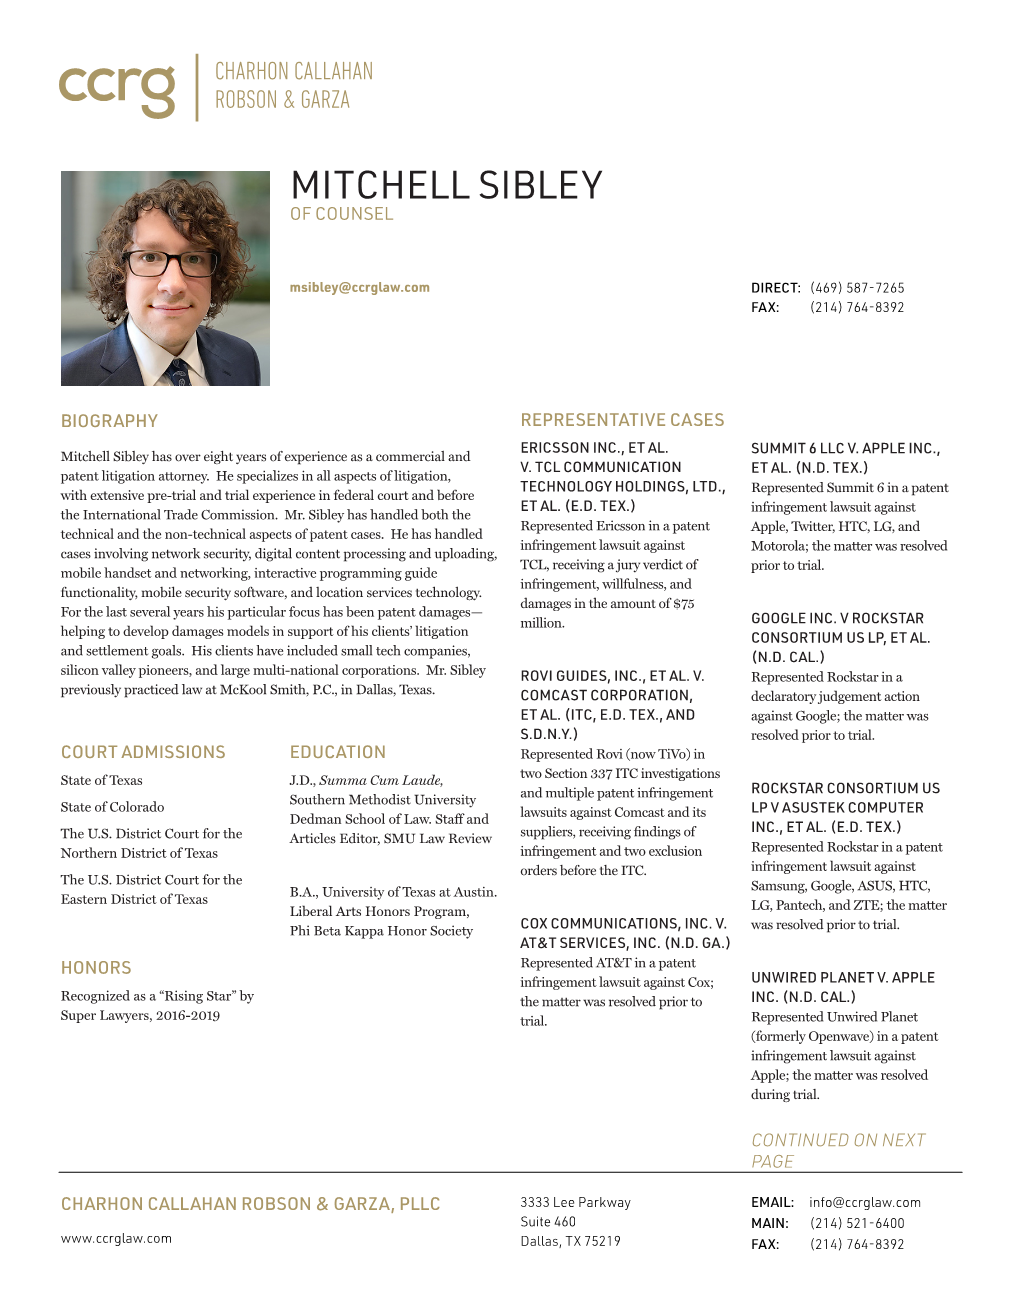 Mitchell Sibley of Counsel